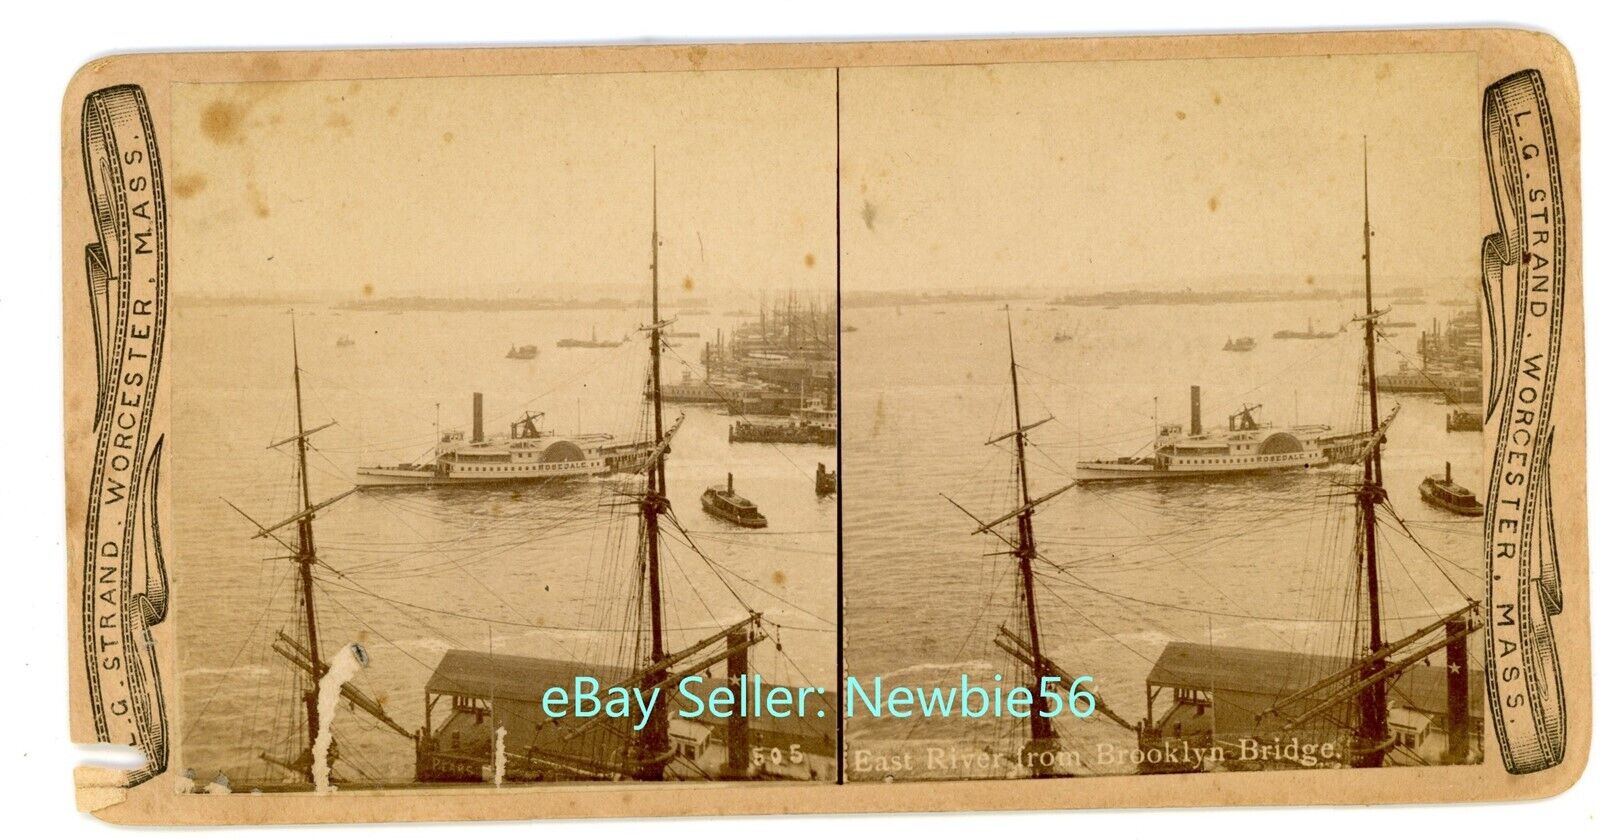 New York City NYC - EAST RIVER BOATS FROM BROOKLYN BRIDGE - c1880s Stereoview